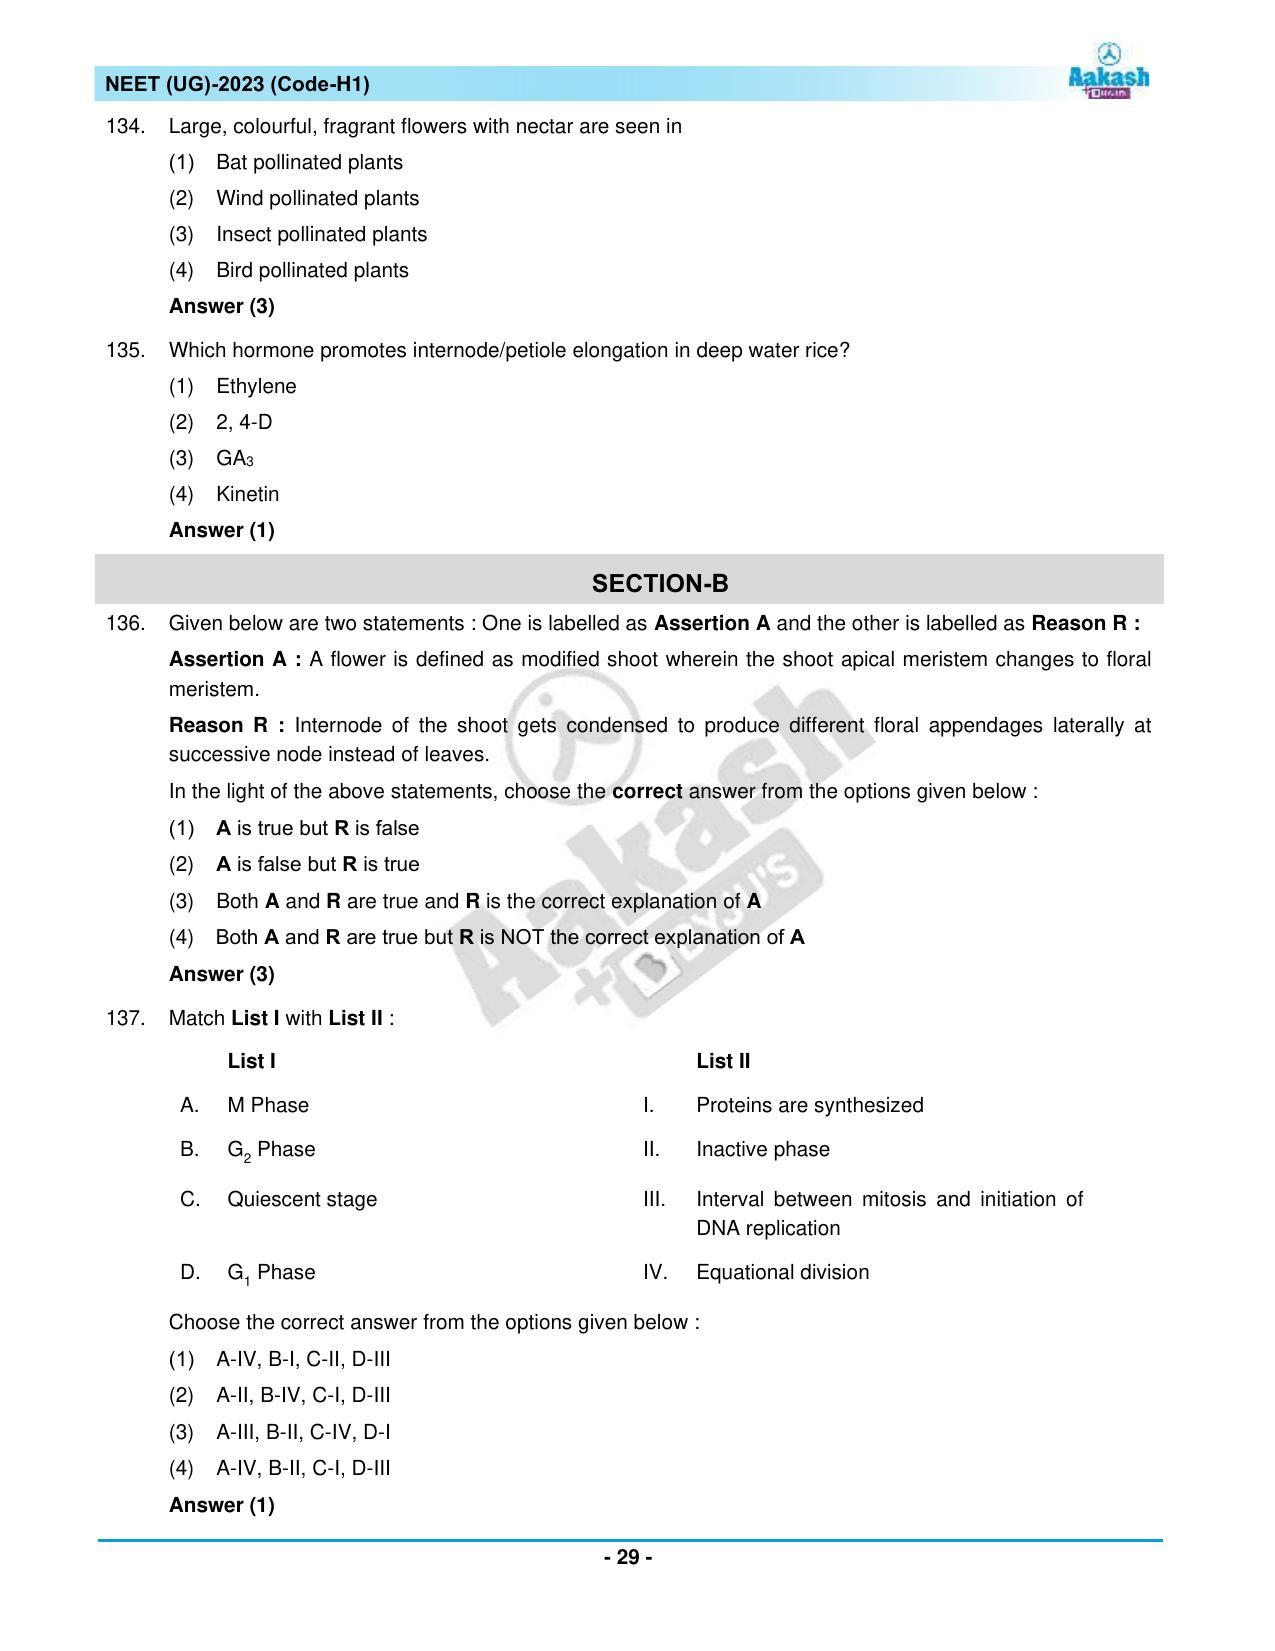 NEET 2023 Question Paper H1 - Page 29